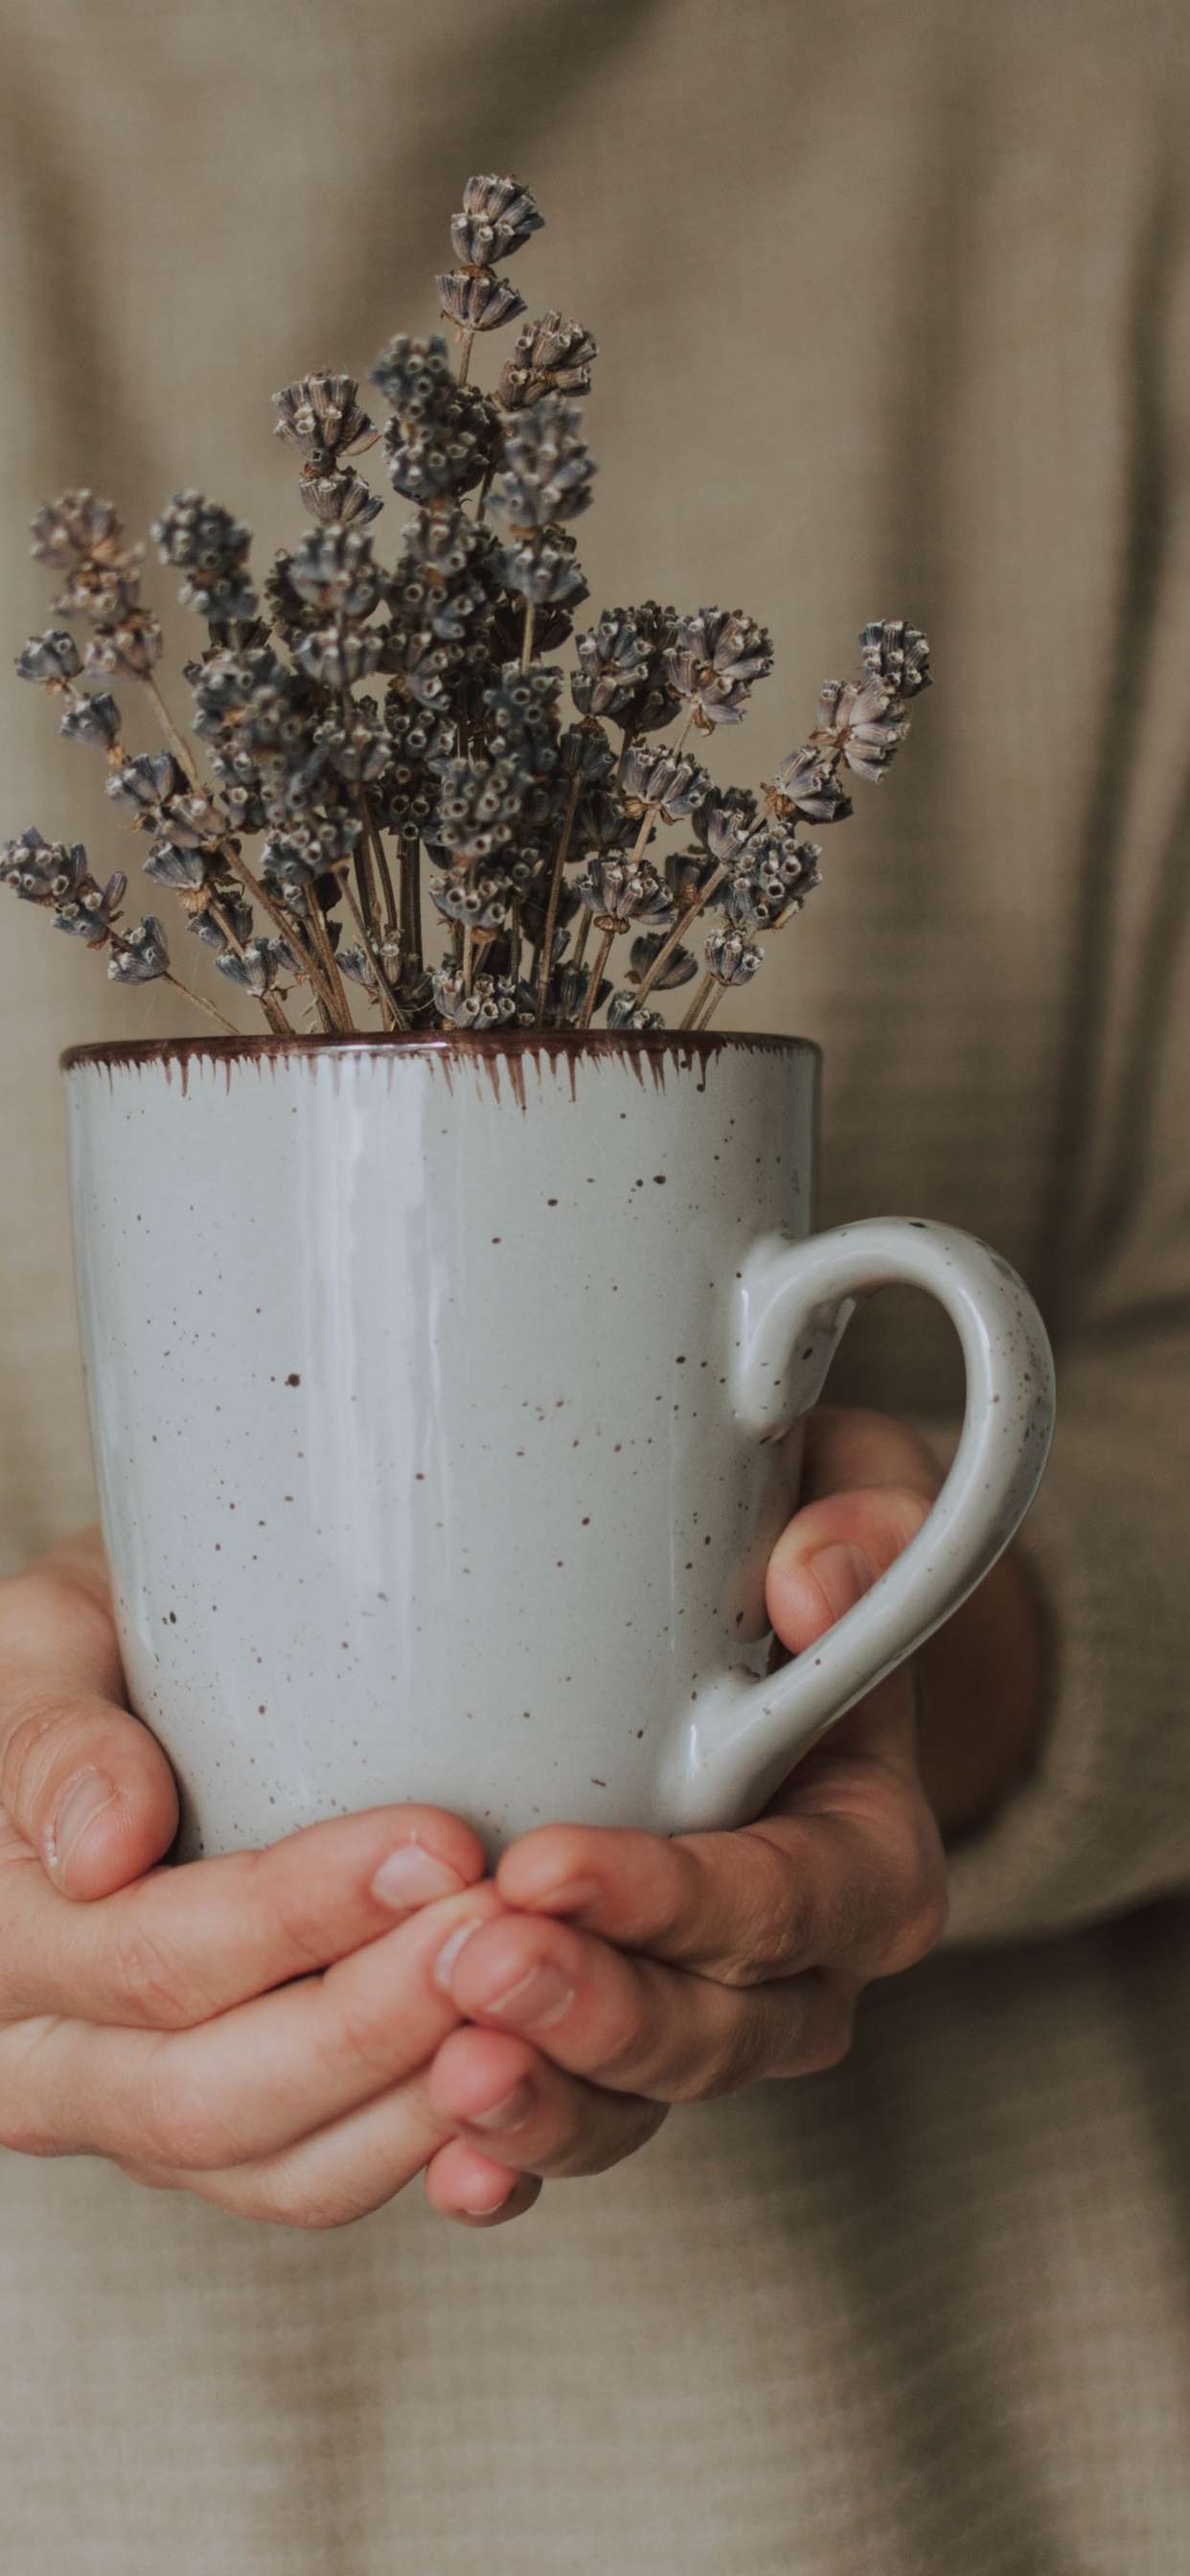 Person Holding White Ceramic Mug With Brown and White Flowers. Wallpaper in 1242x2688 Resolution